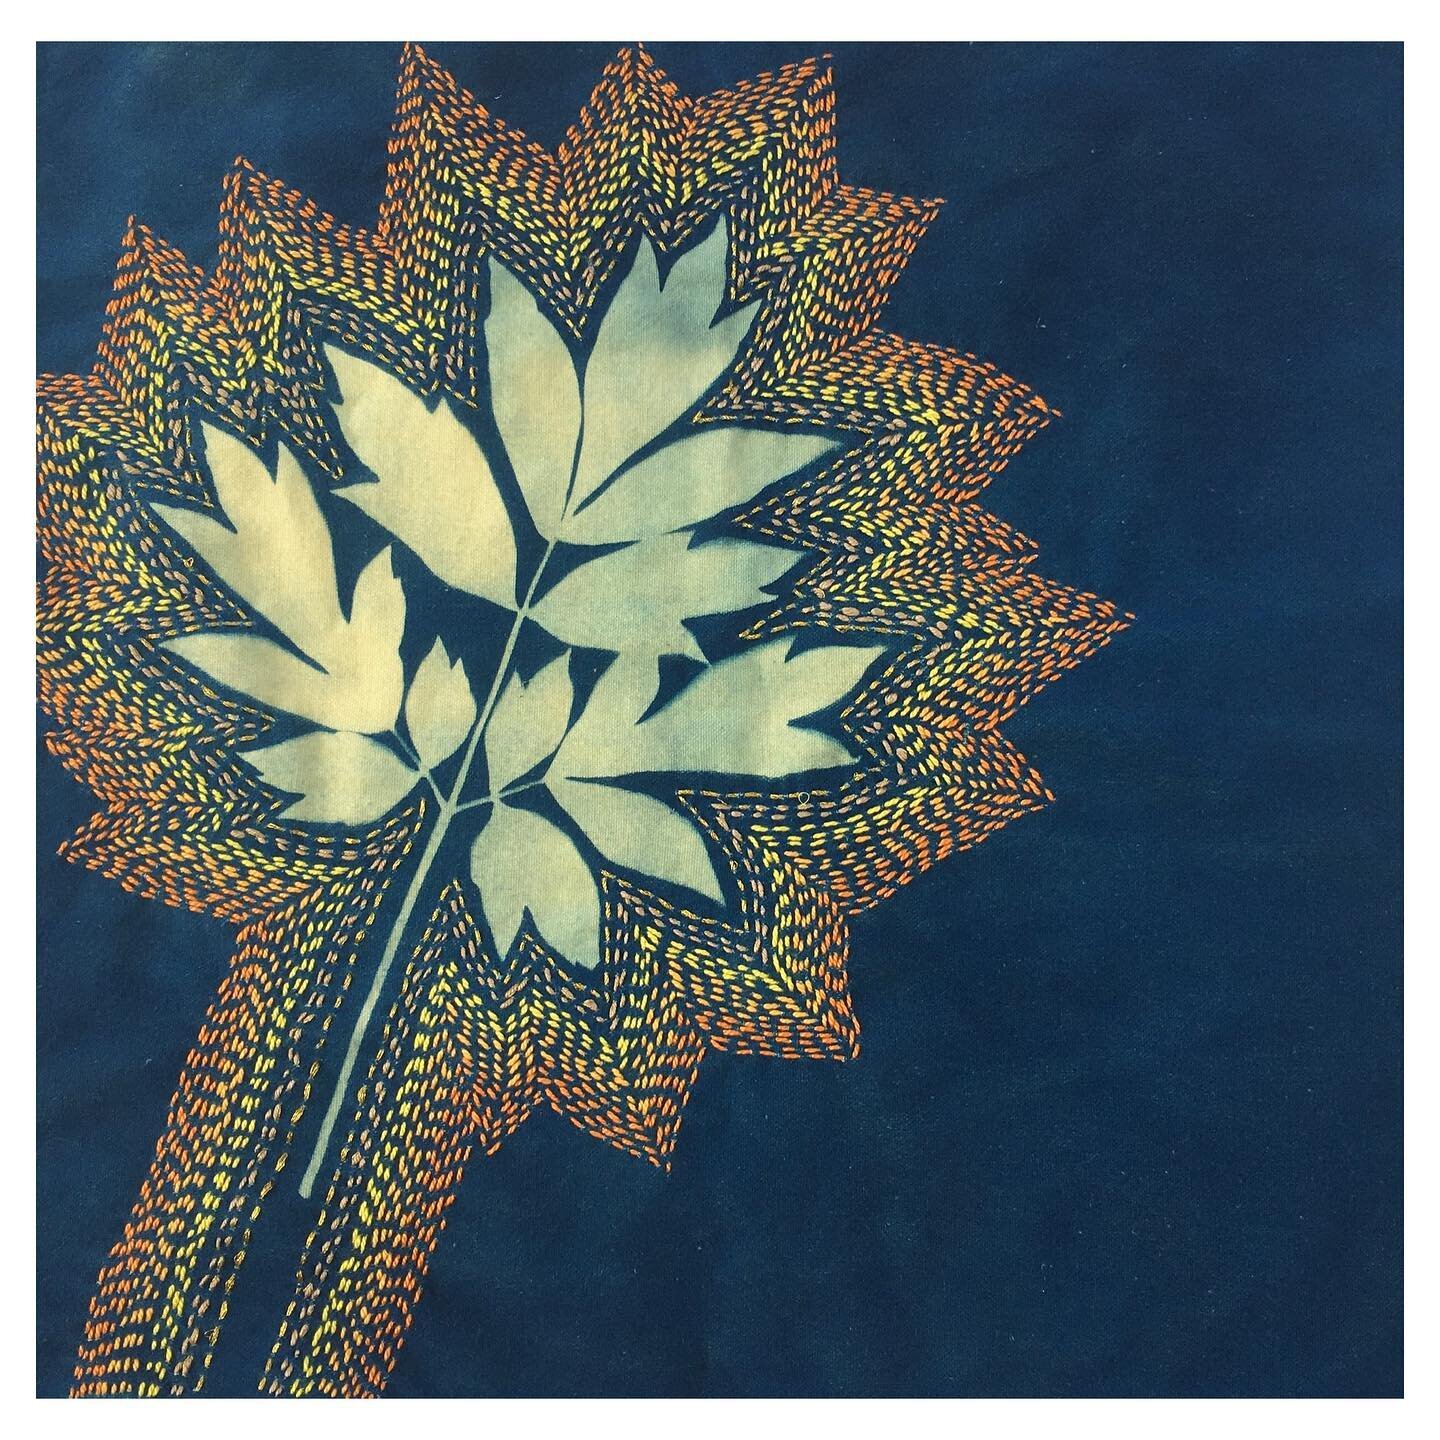 Finished #sashiko stitched #peony leaf #cyanotype on an #upcycled yellow linen napkin. I used a mix of threads: gold, silk and perle. Swipe to see the back side.